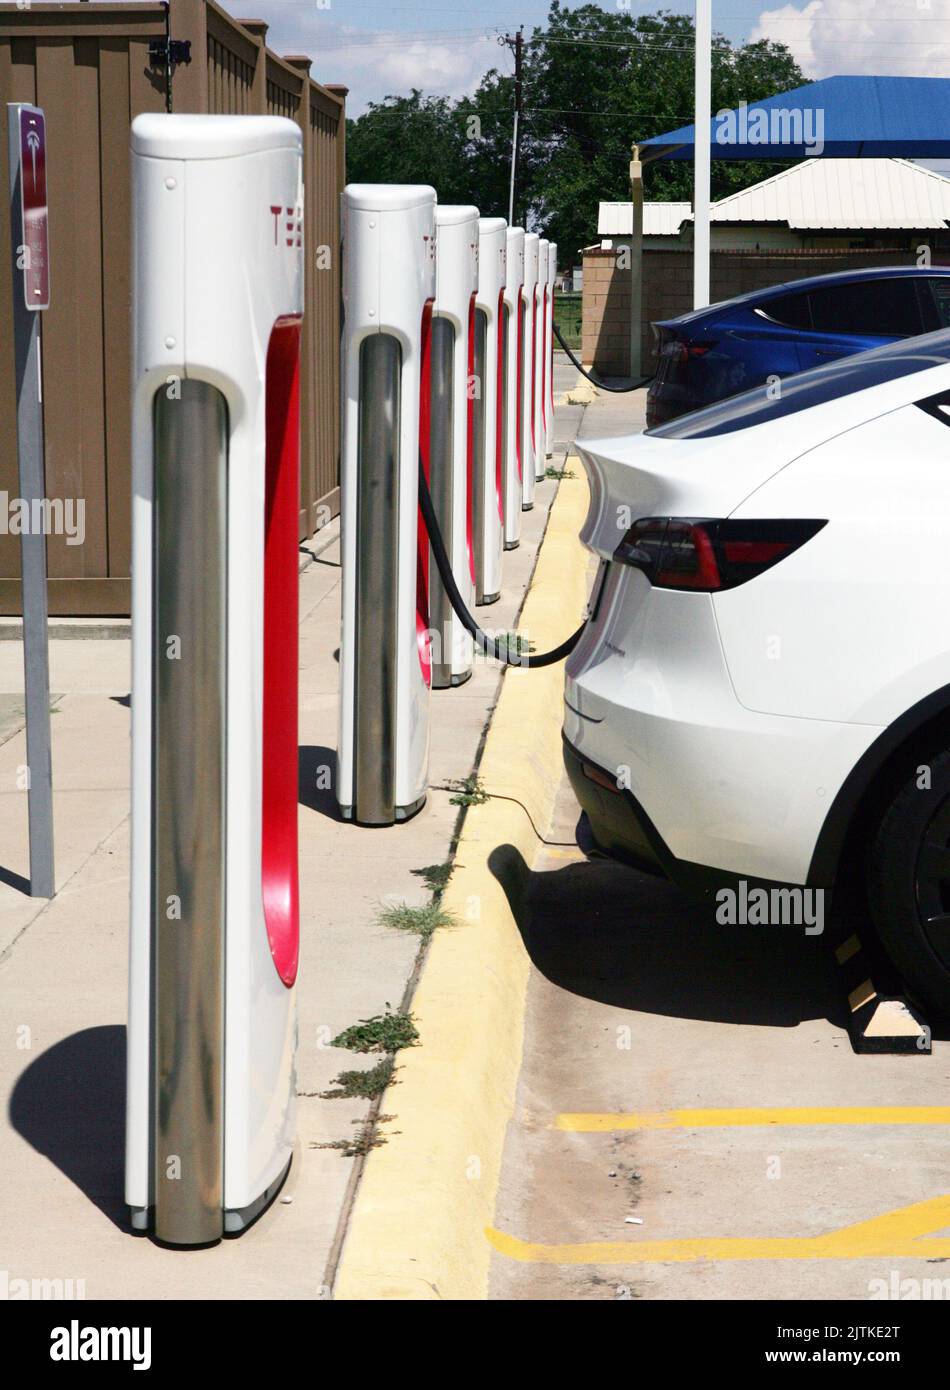 Childress, USA. 23rd Aug, 2022. Two Tesla vehicles charge at Texas service station. The eight charging stations are a new addition to the service station located in Childress, Texas on Aug. 23, 2022. Childress, population 6,109, is located on HWY 287 between Wichita Falls and Amarillo, Texas. (Photo by Steven Clevenger/Sipa USA) Credit: Sipa USA/Alamy Live News Stock Photo